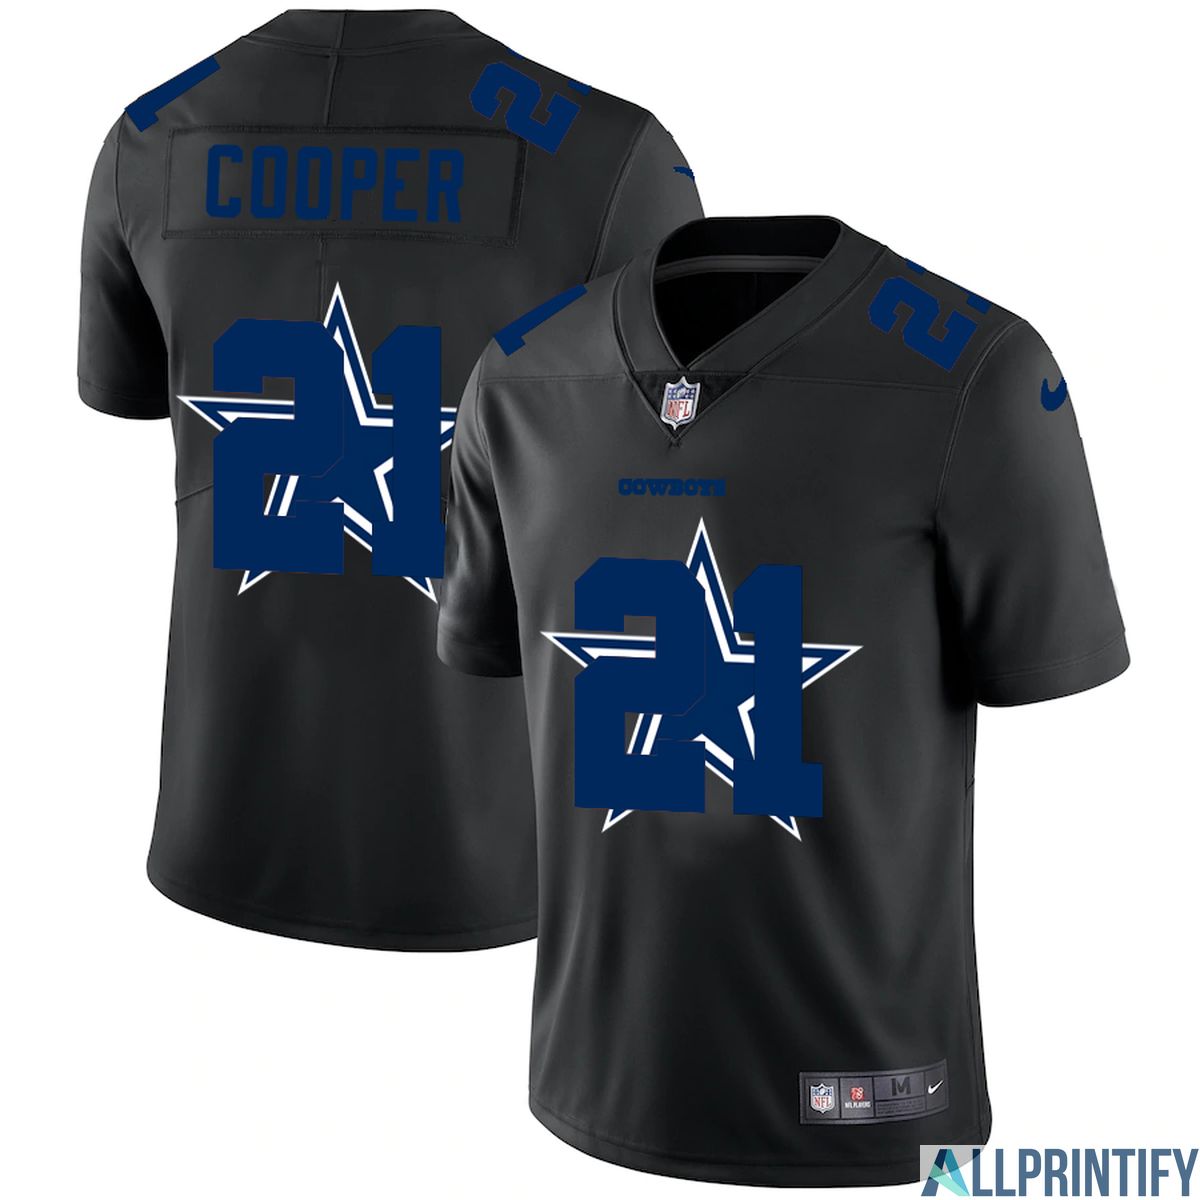 Cooper Dallas Cowboys 21 Limited Player Jersey